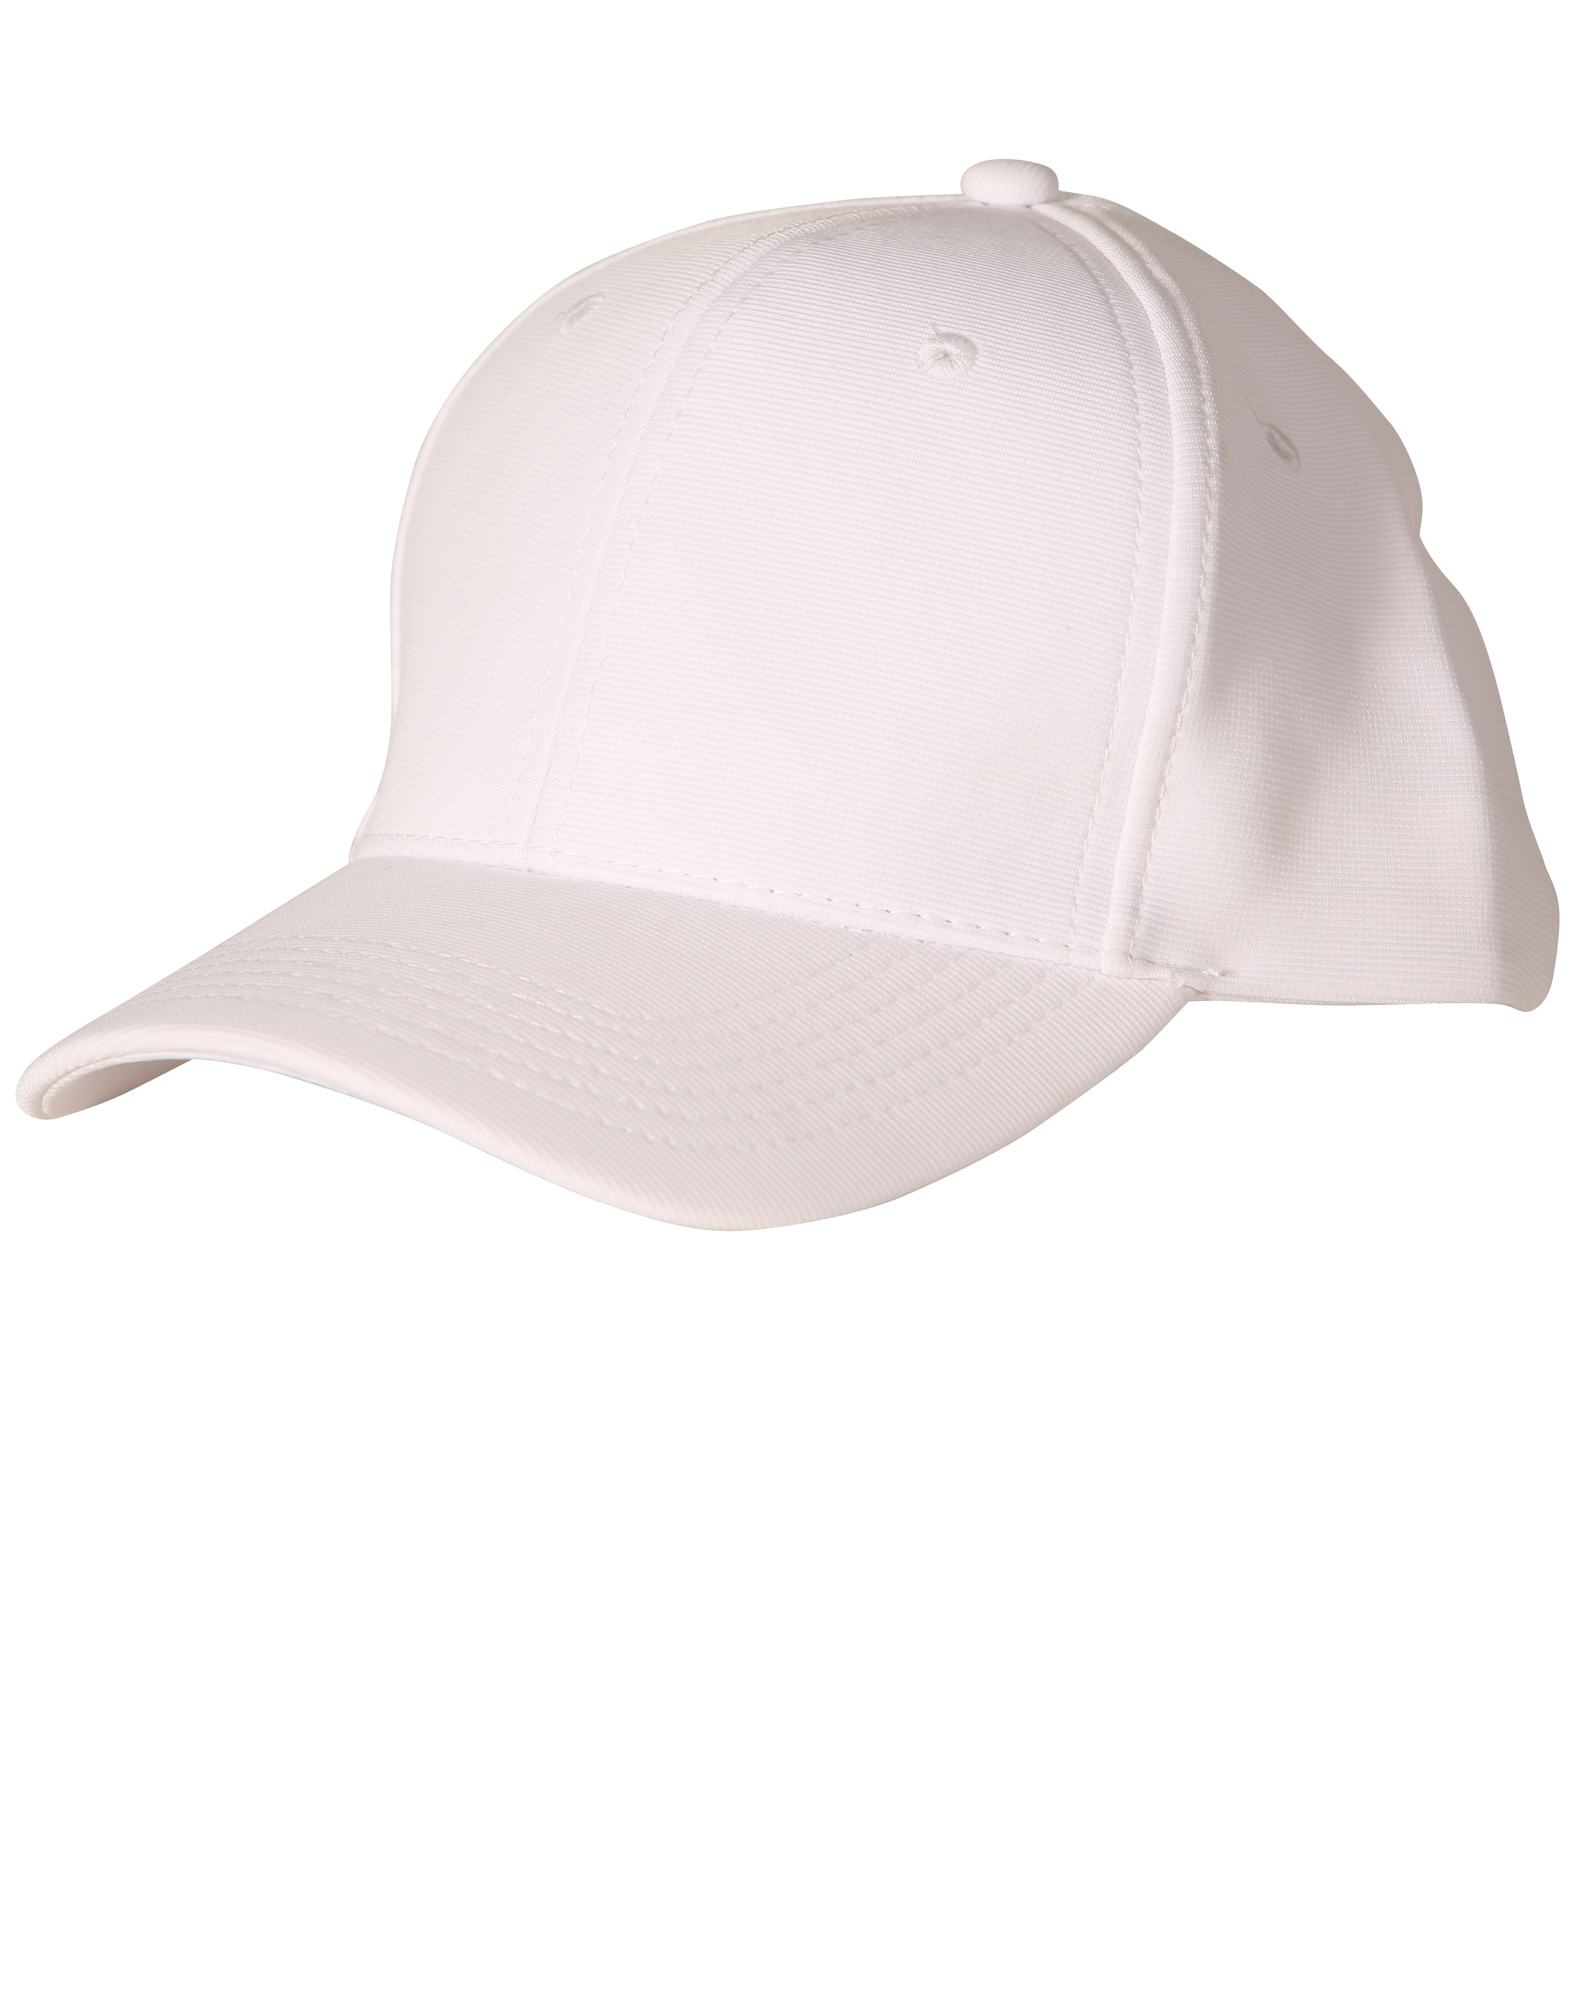 WORKWEAR, SAFETY & CORPORATE CLOTHING SPECIALISTS - Ottoman Pique Mesh Cap